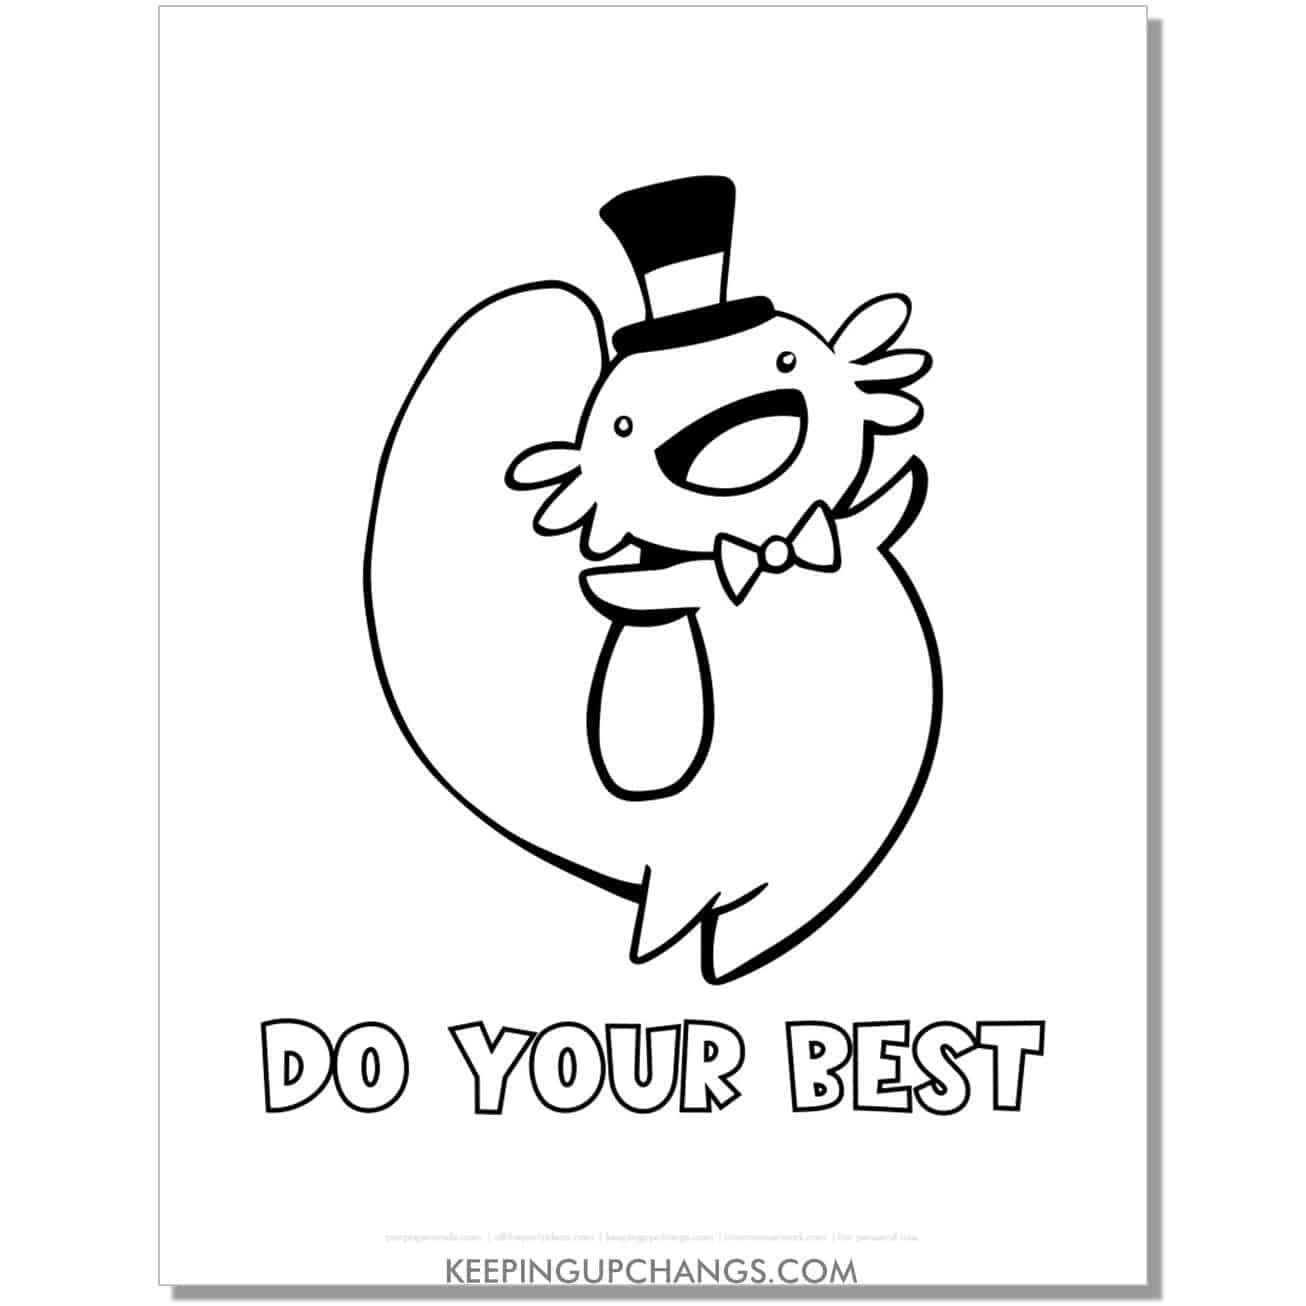 free cute, fun axolotl in top hat coloring page, colouring sheet with do your best message.